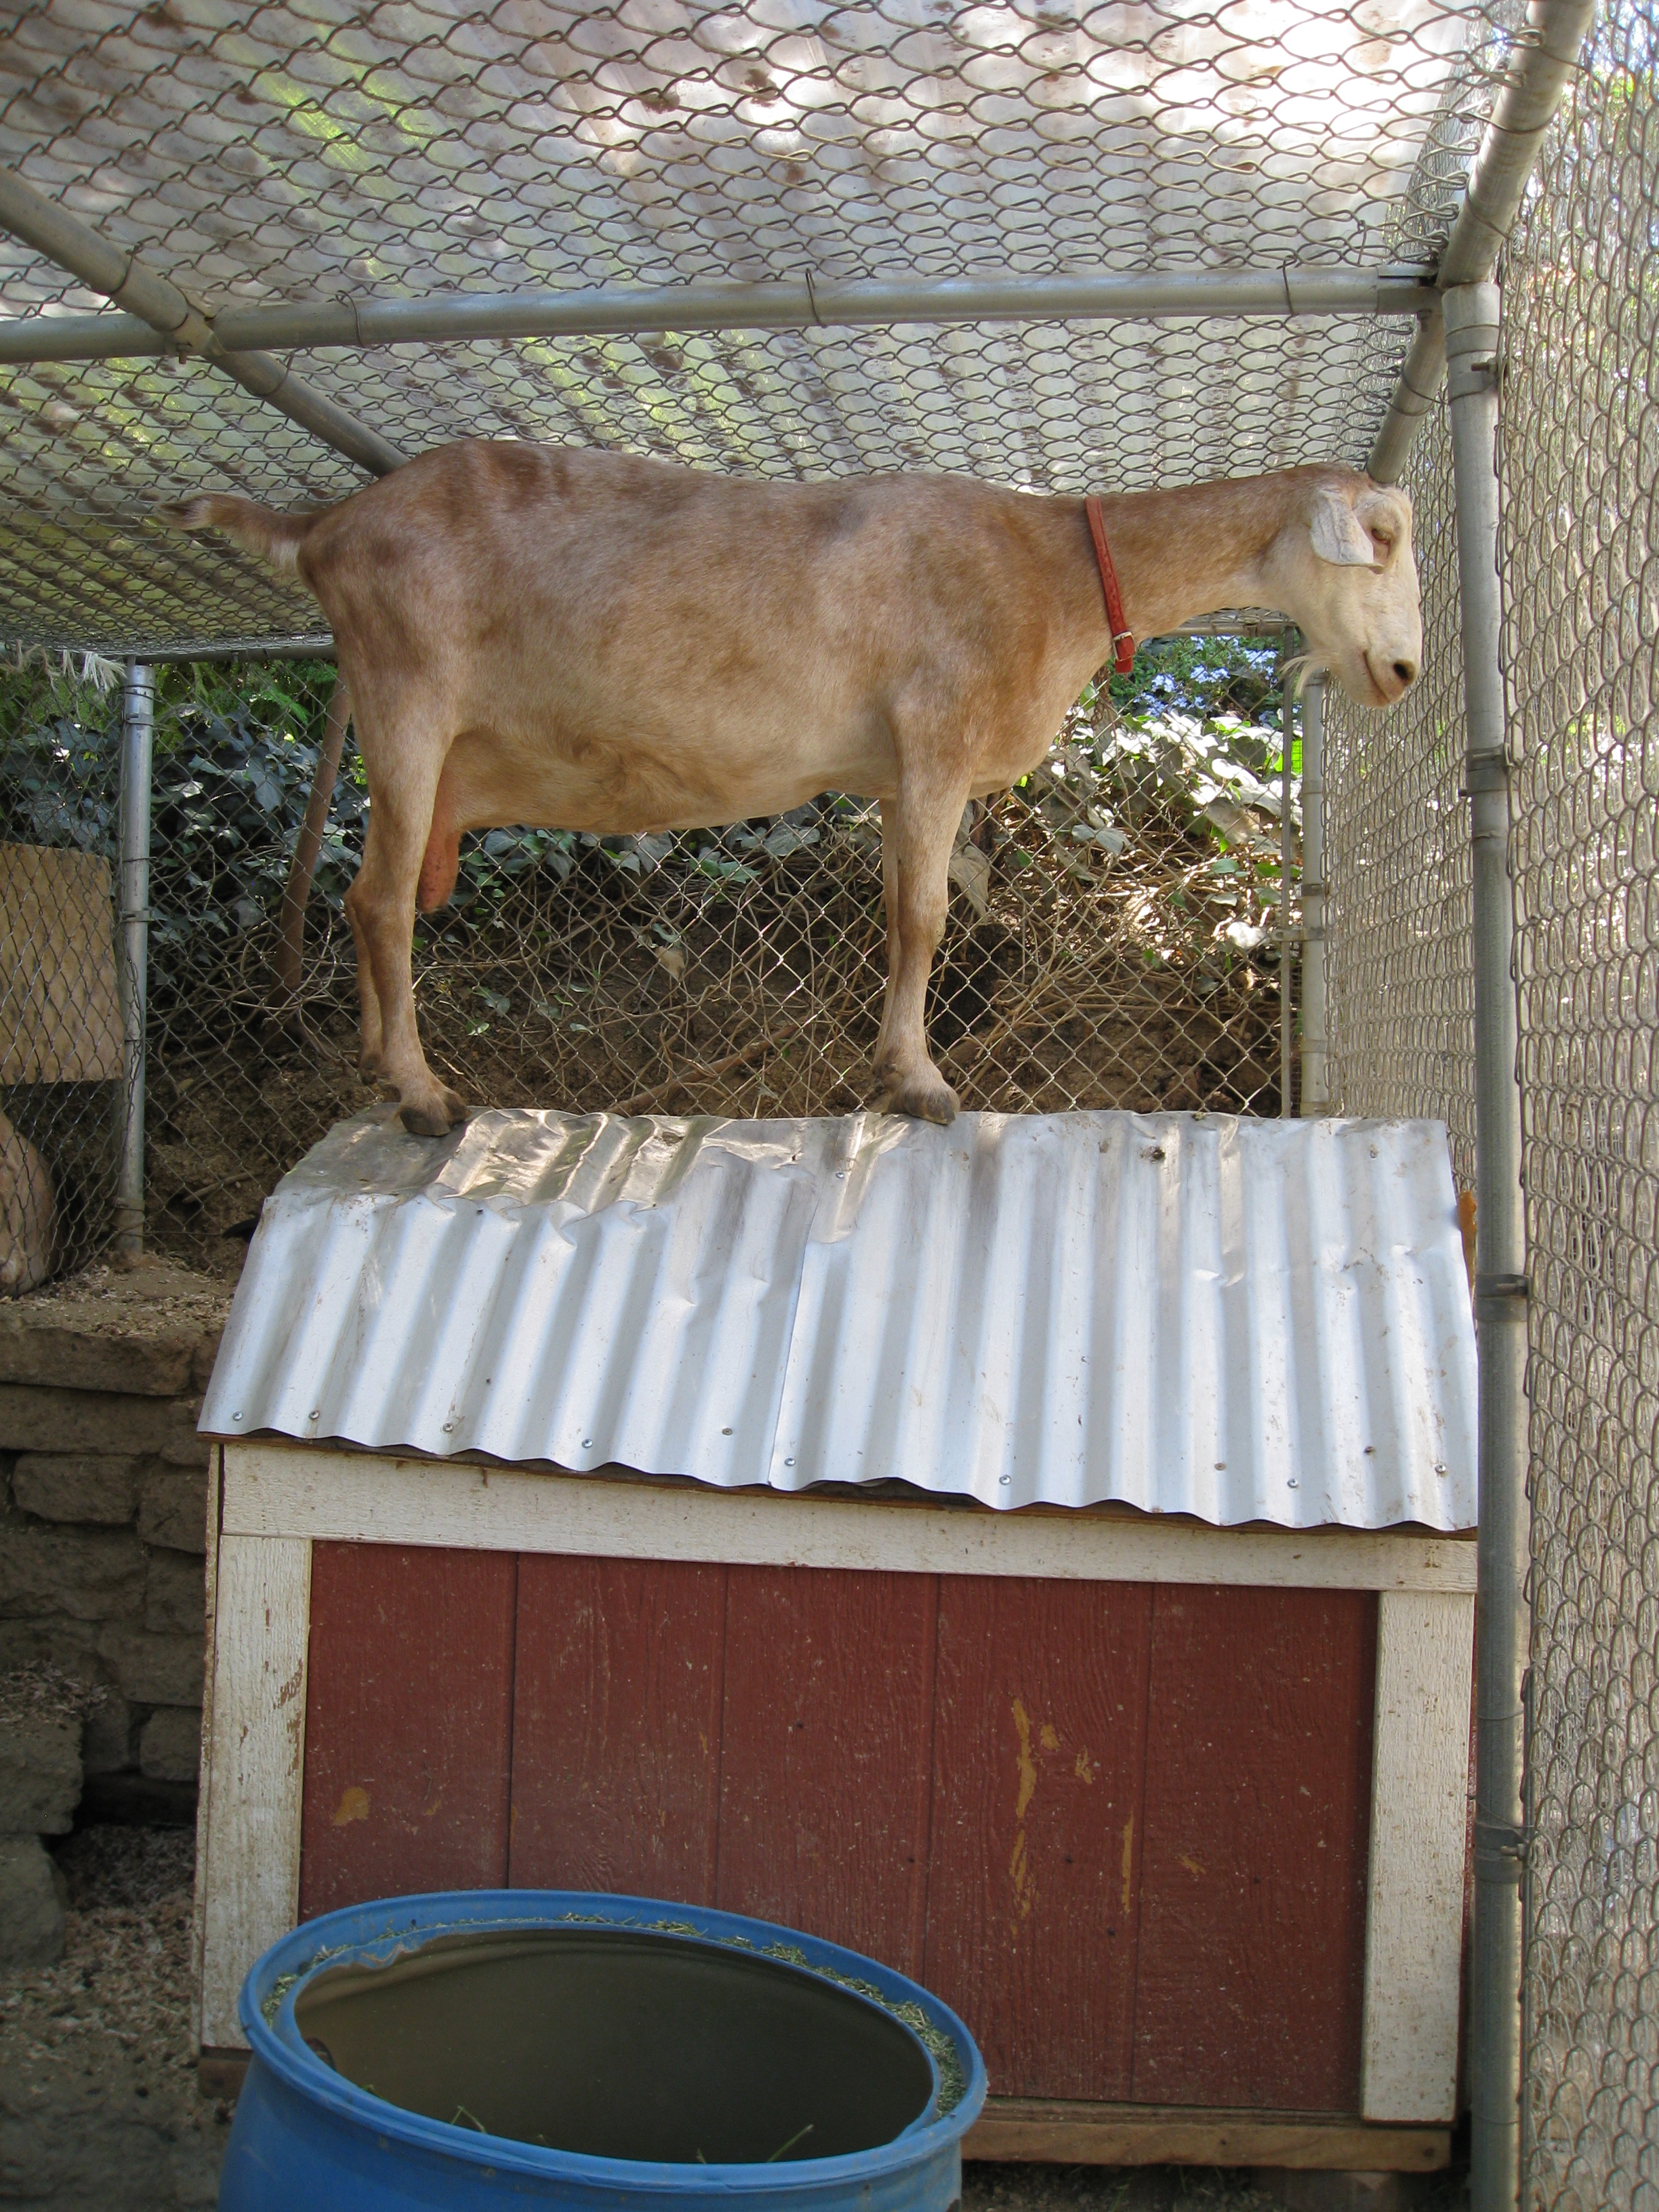 Goat on a hot tin roof